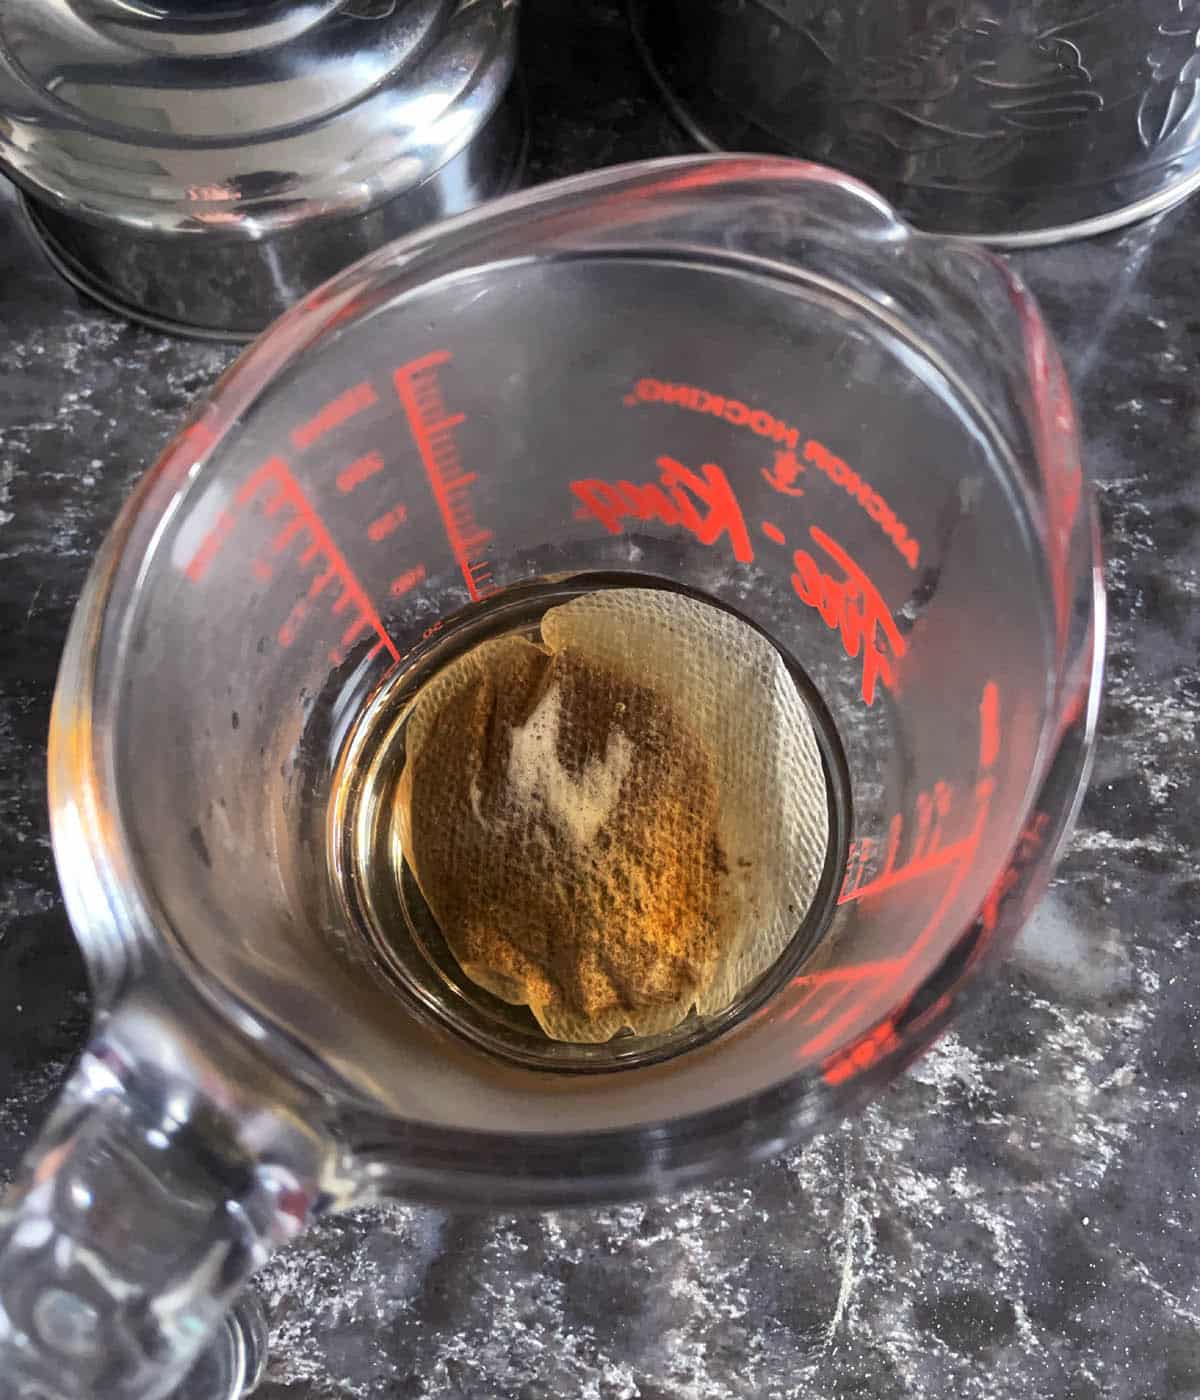 A round tea bag in a glass measuring cup with water.